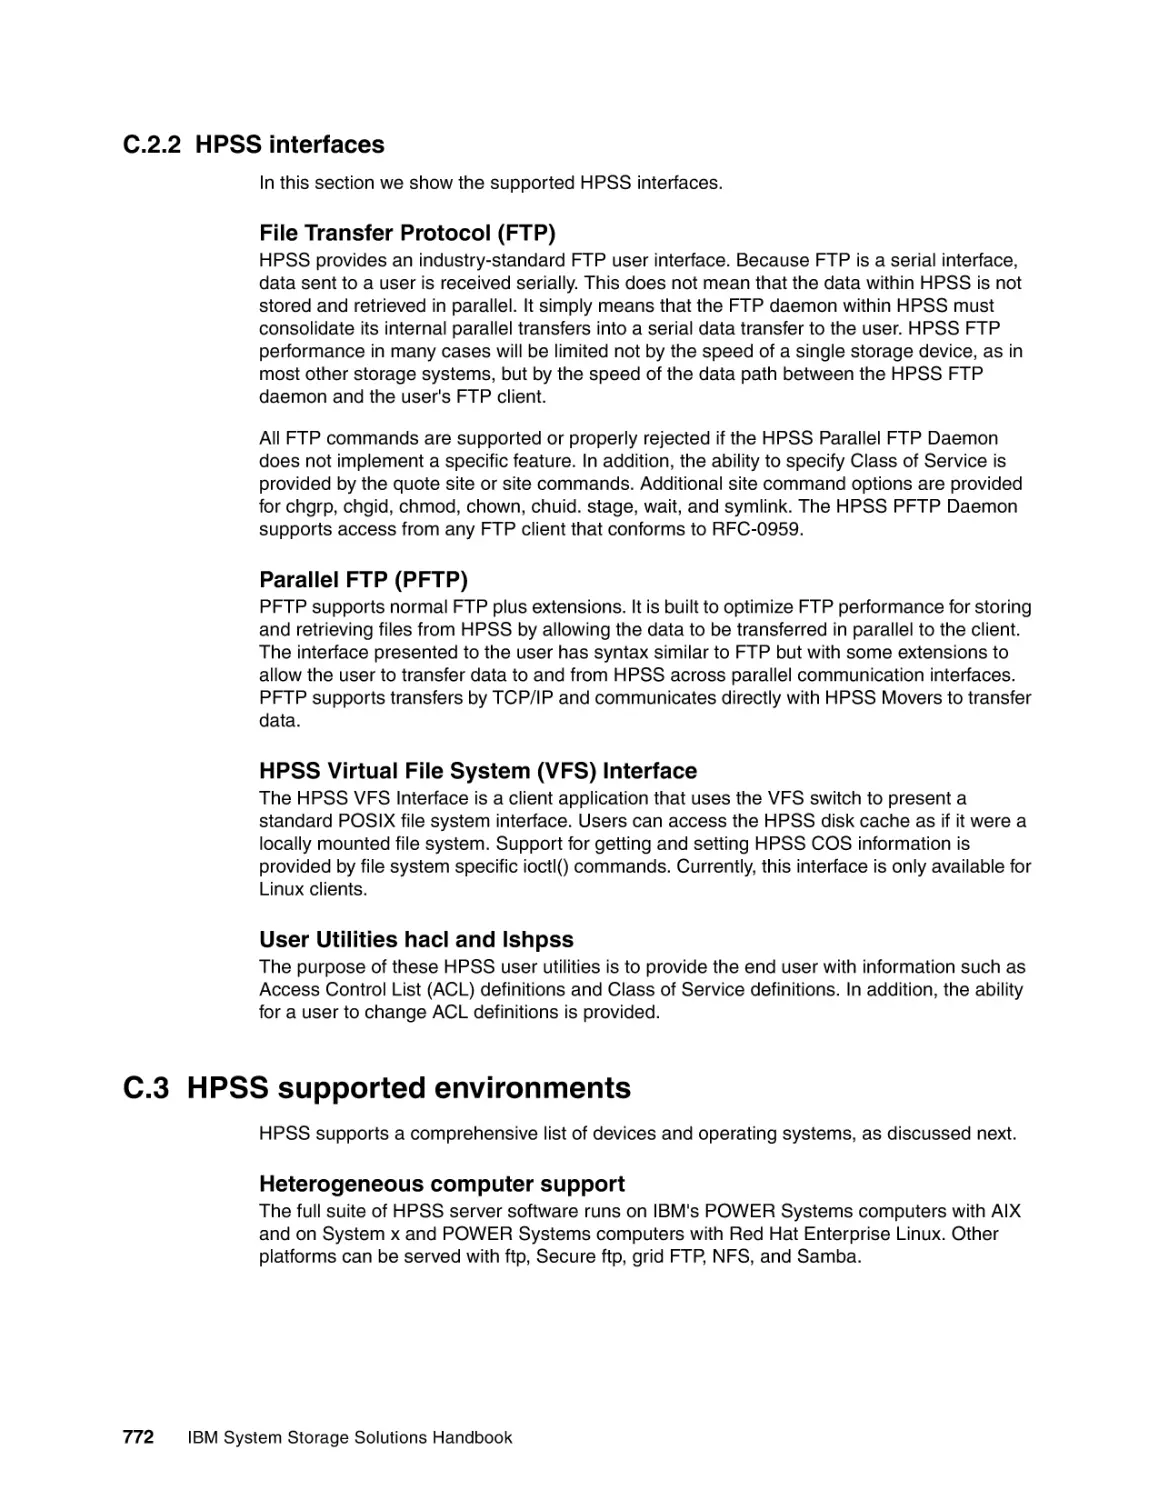 C.2.2 HPSS interfaces
C.3 HPSS supported environments